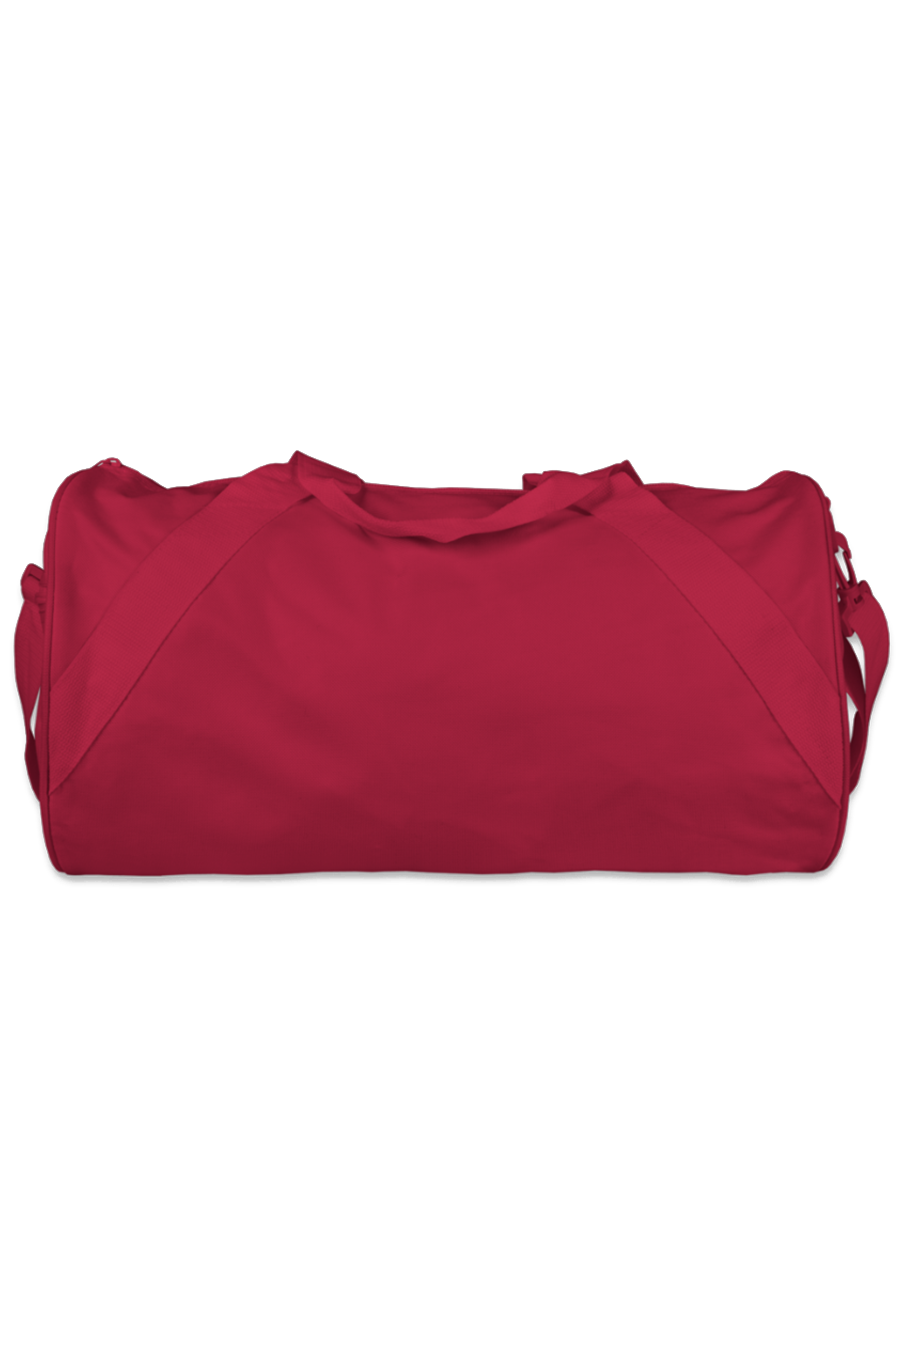 Not Yours Duffel Bag | Red - Main Image Number 2 of 2